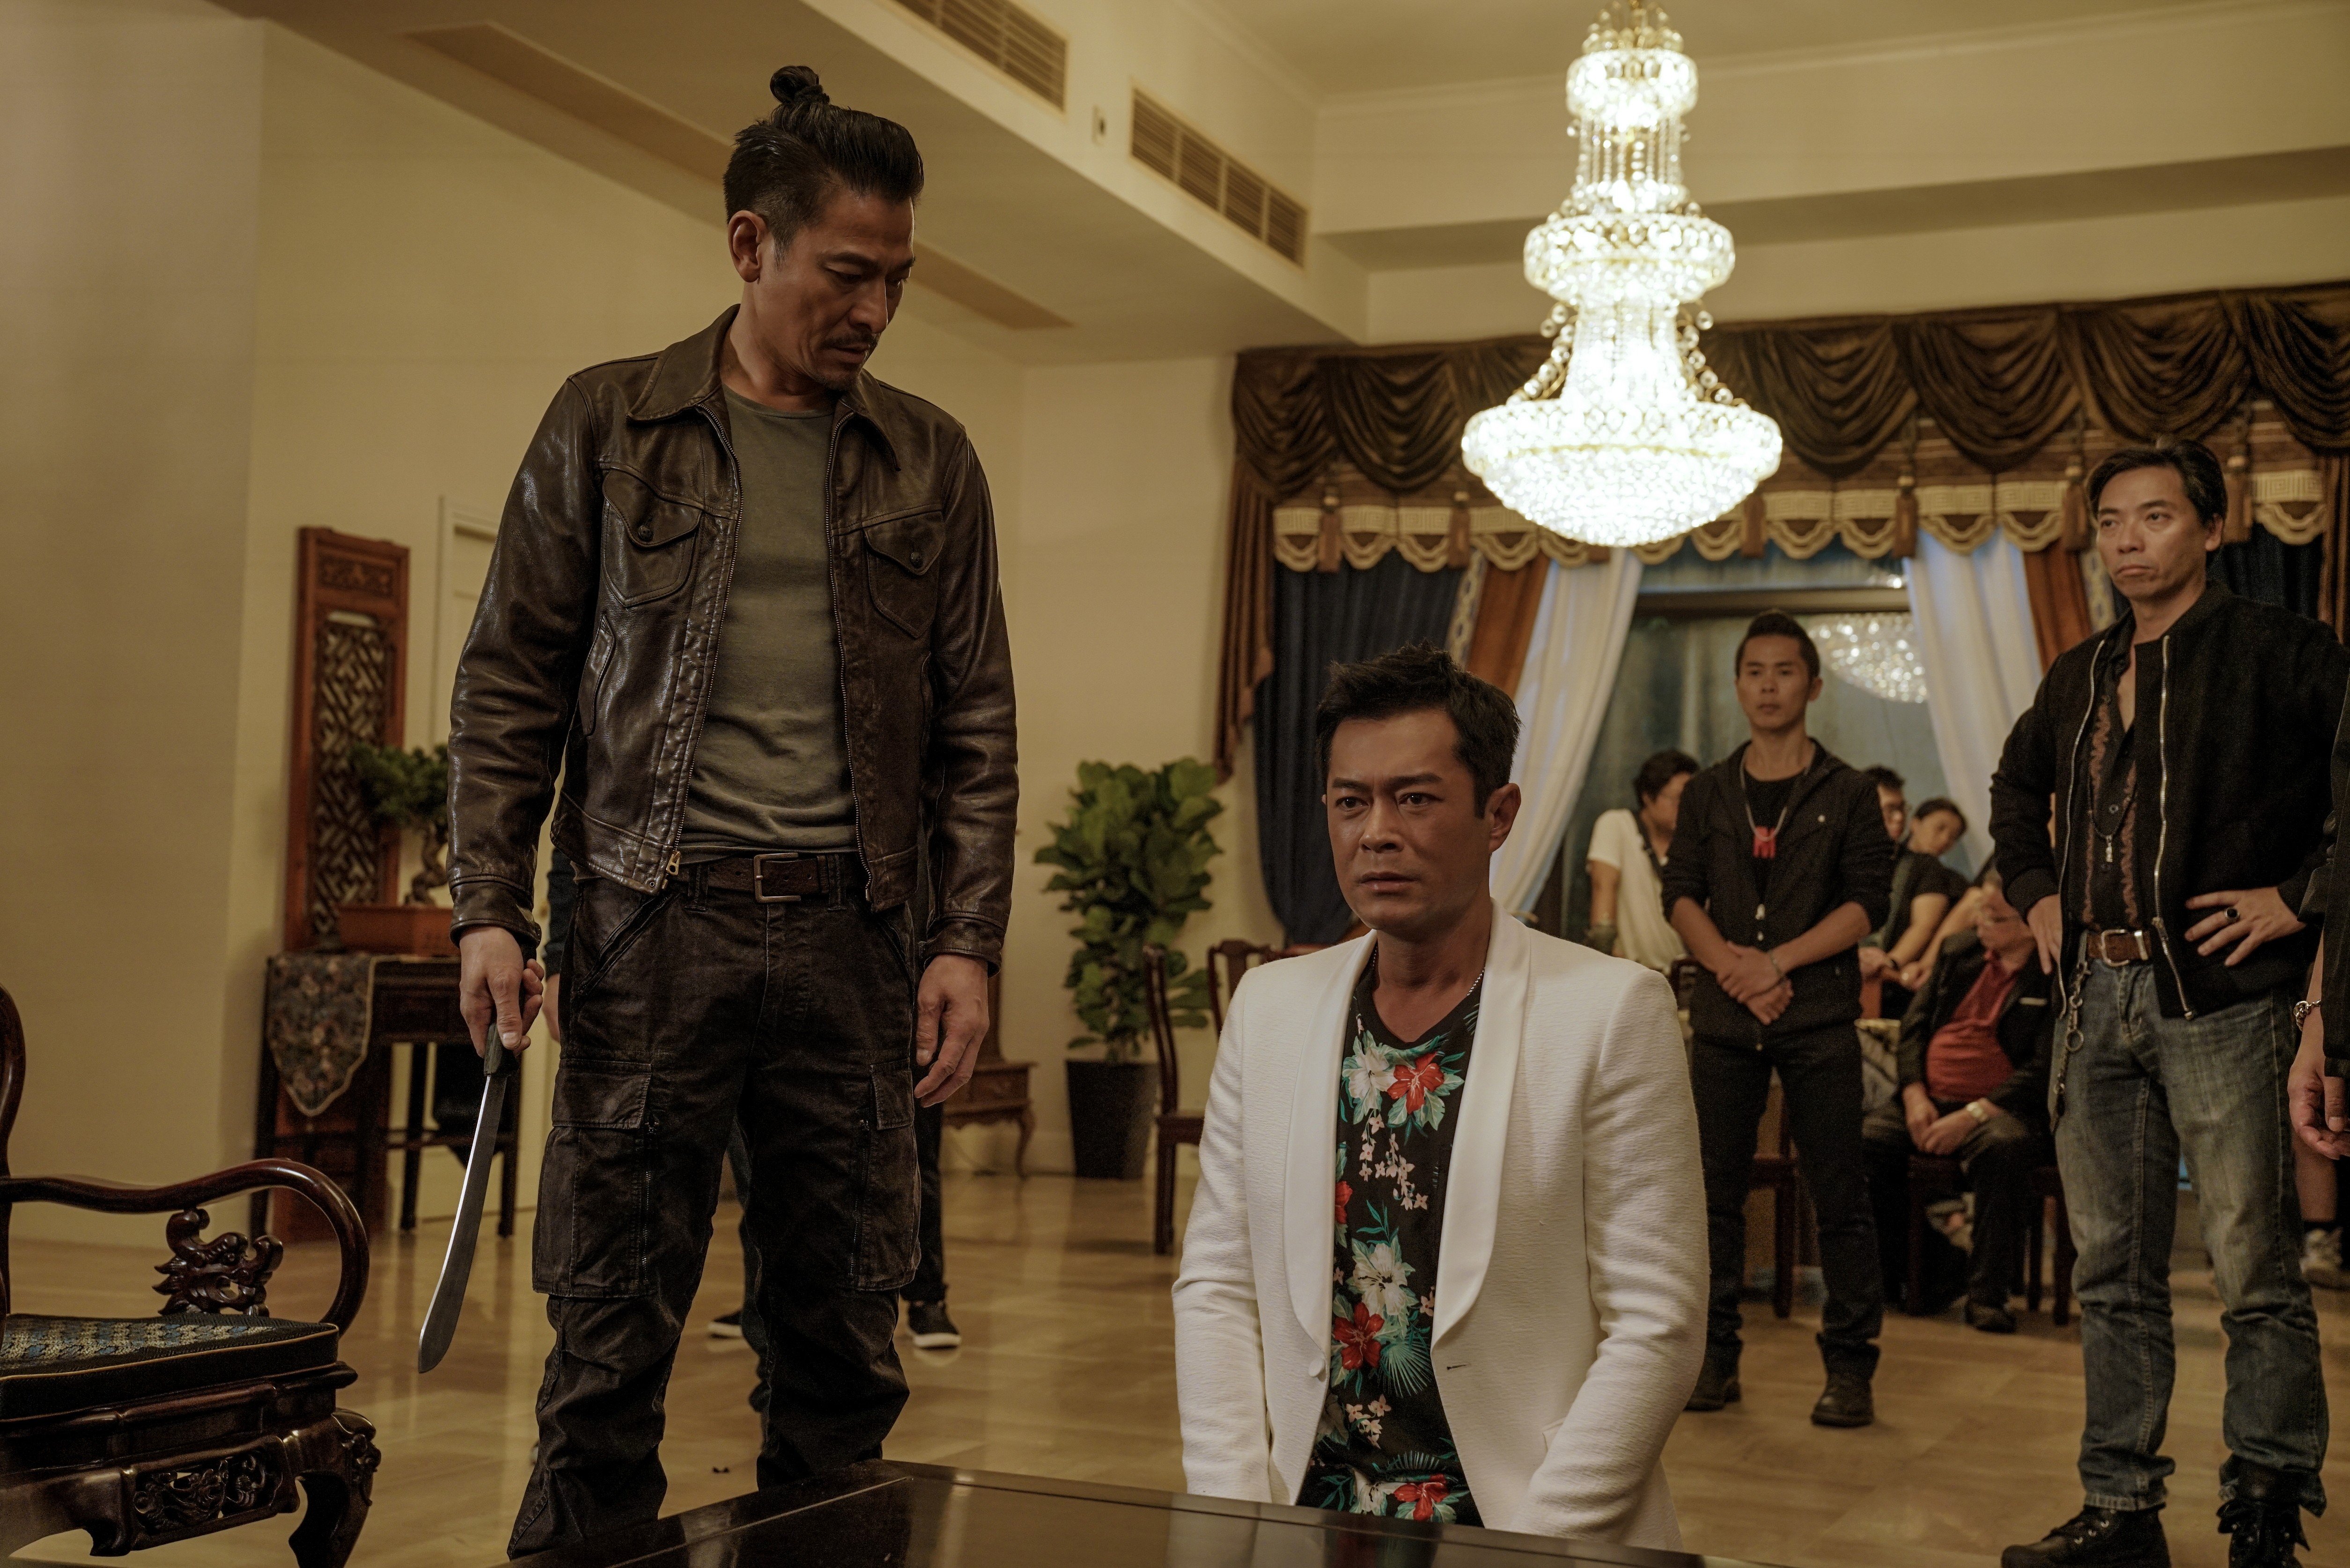 Andy Lau (left) and Louis Koo in The White Storm 2: Drug Lords, a Hong Kong-set crime thriller that has taken 1.4 billion yuan at the Chinese box office this summer.